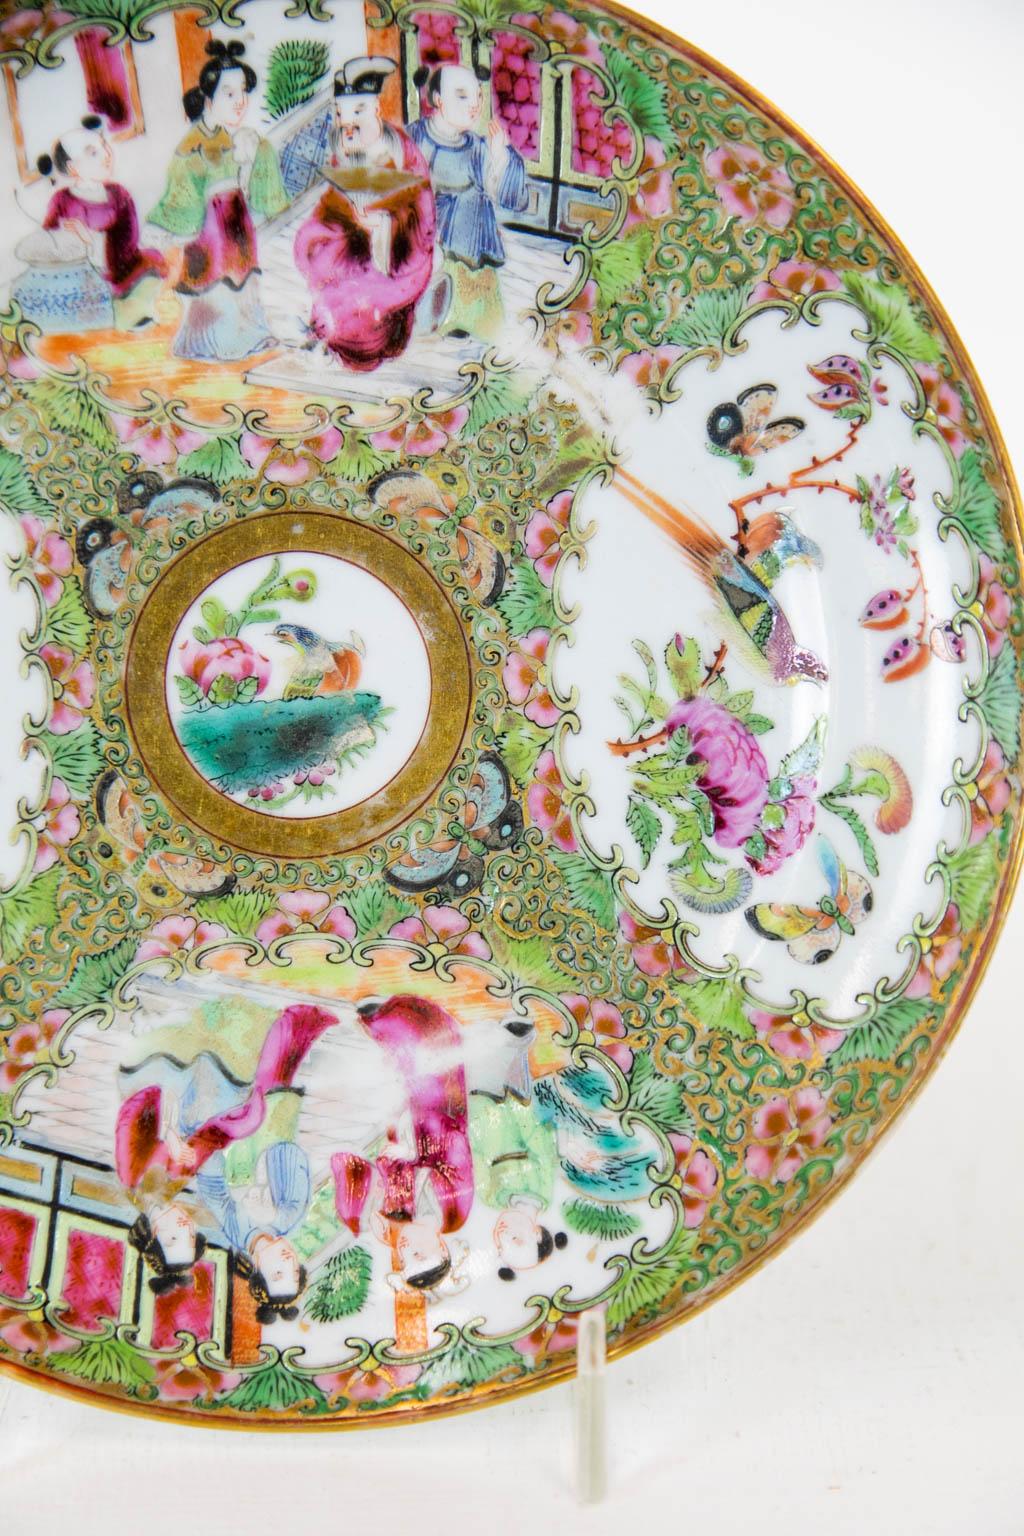 This plate has four cartouches depicting birds, butterflies, and Mandarin court scenes. It is in mint condition.